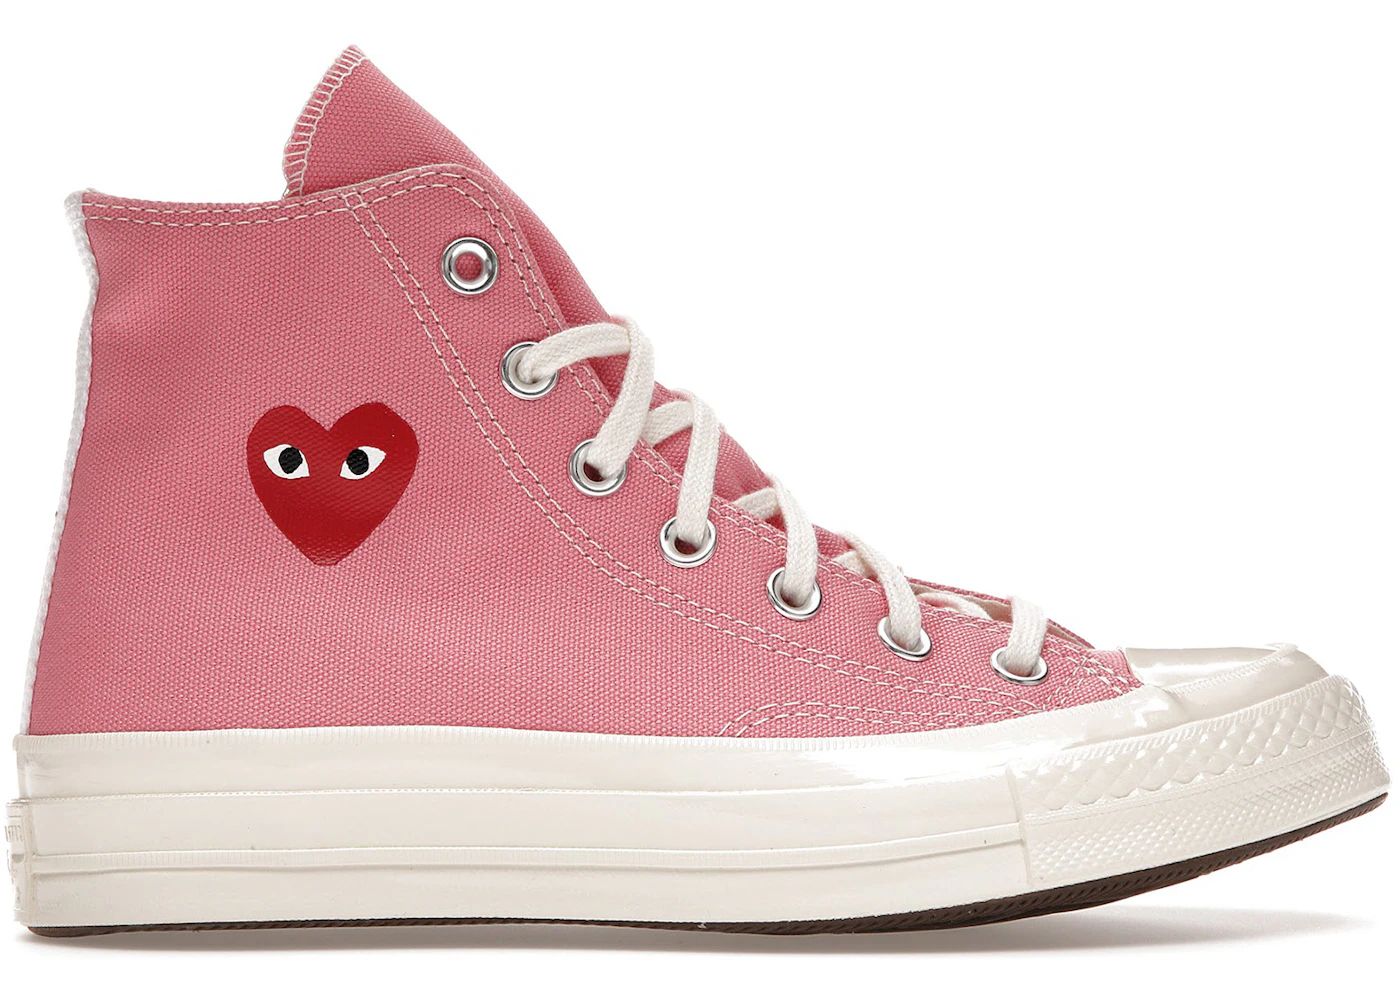 Converse Chuck Taylor All-Star 70 Hi Comme des Garcons Play Bright Pink | StockX